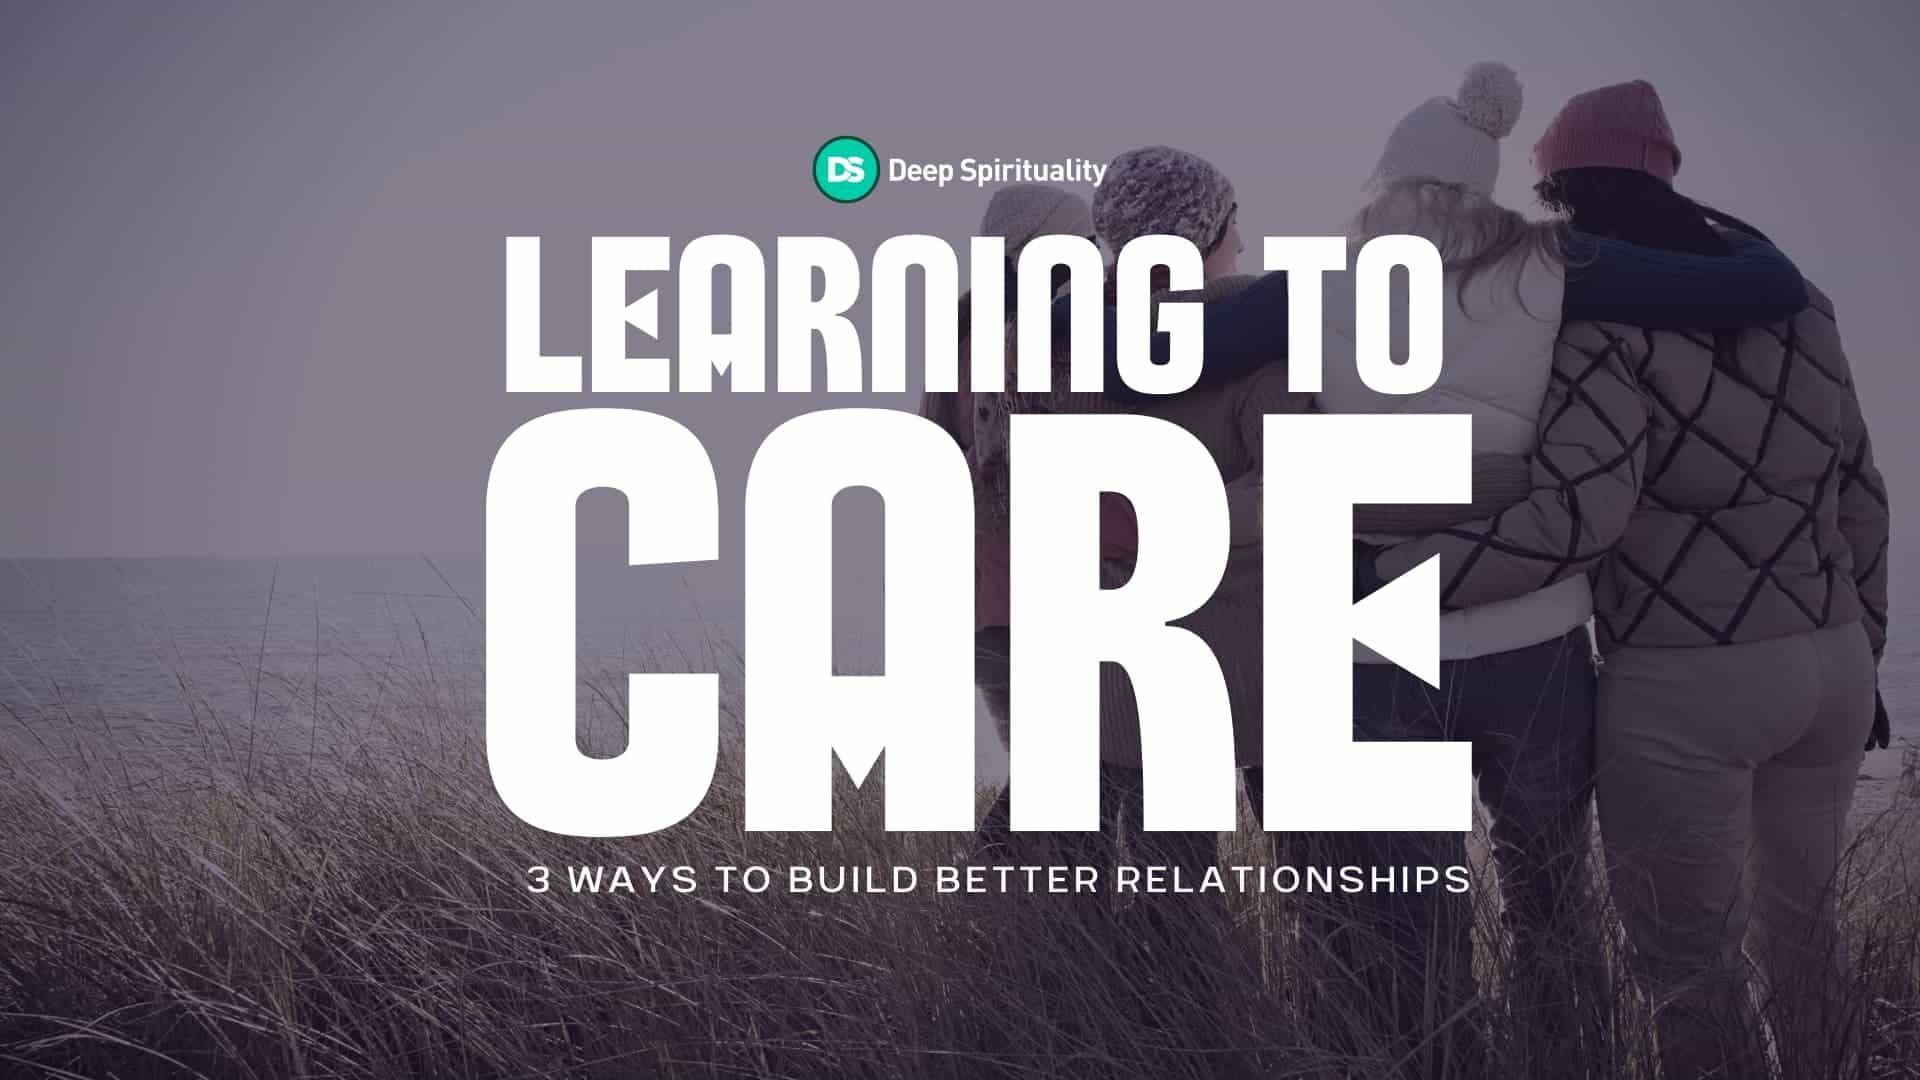 Learning to Care: 3 Ways to Build Better, More Compassionate Relationships 4